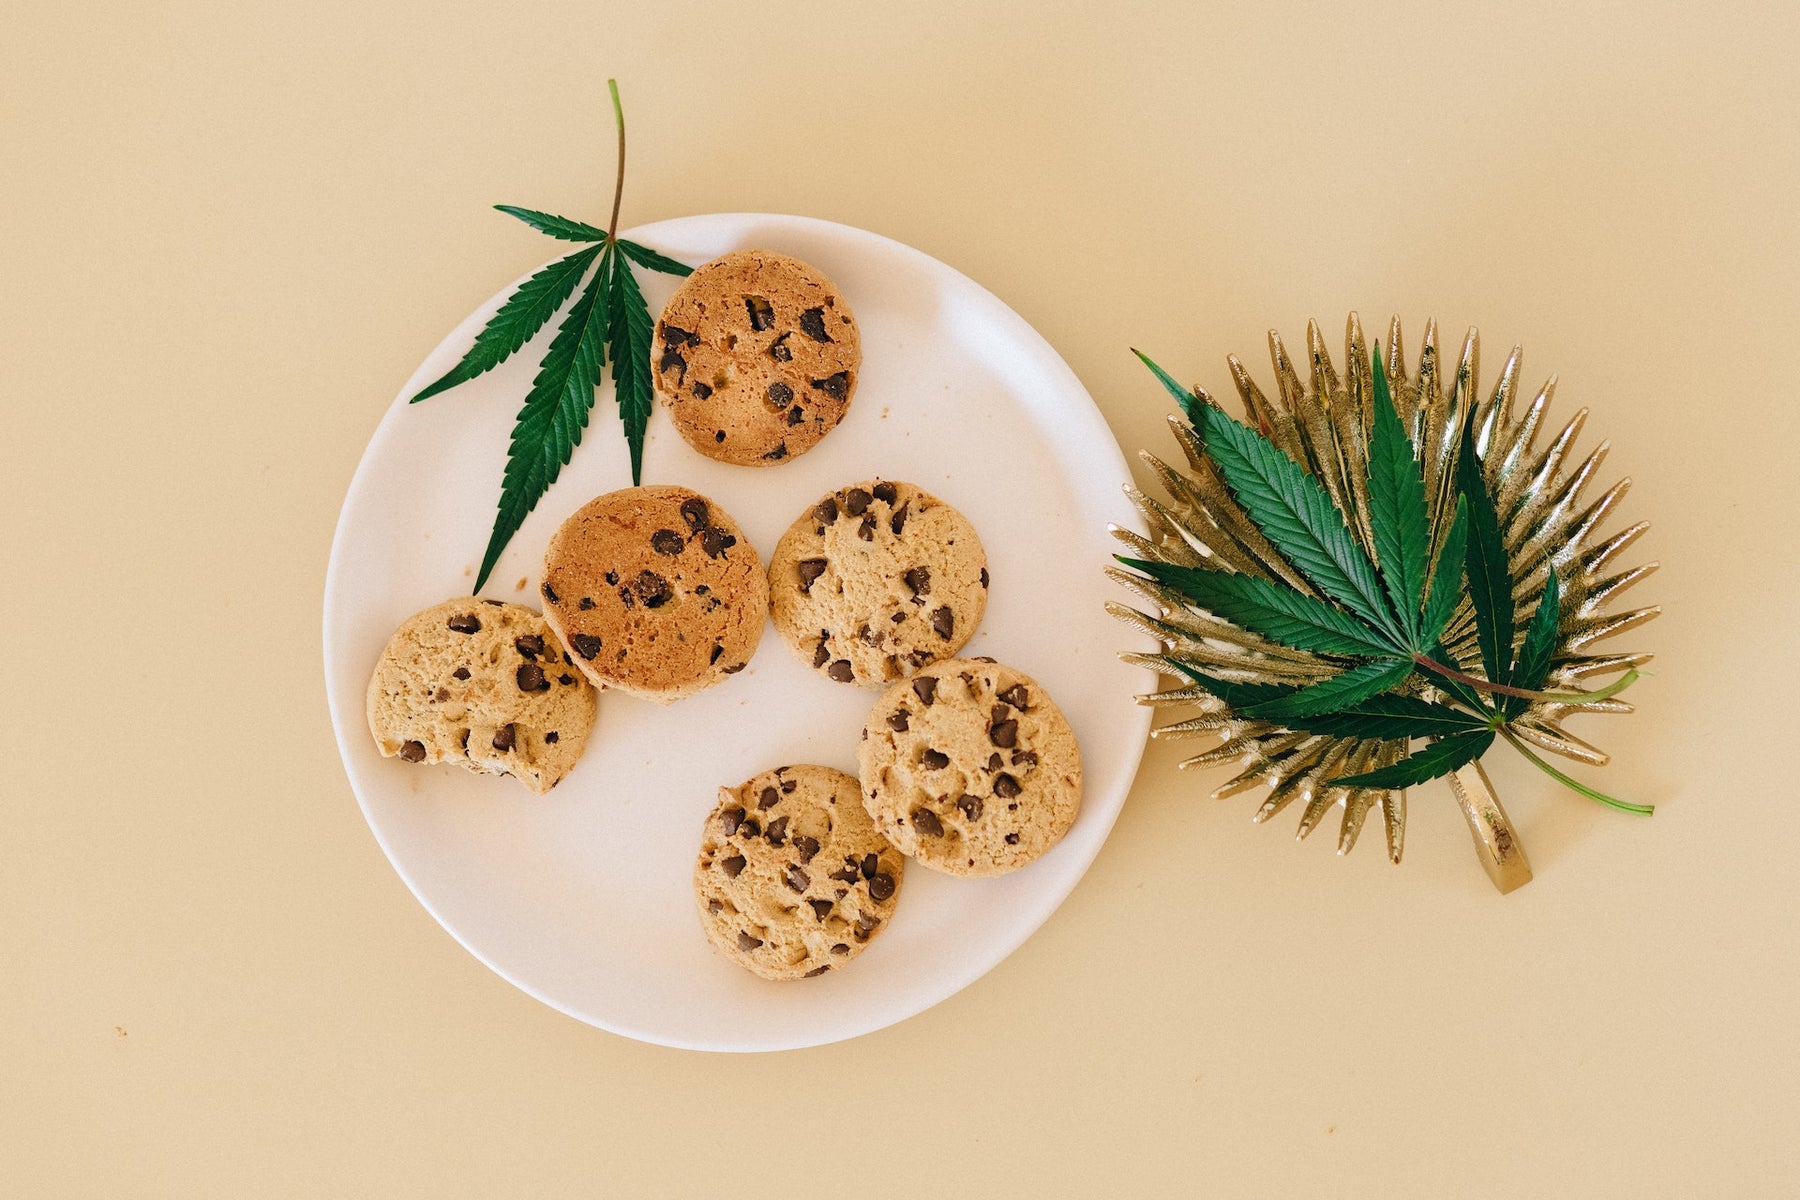 How to Pair Chocolate With Cannabis